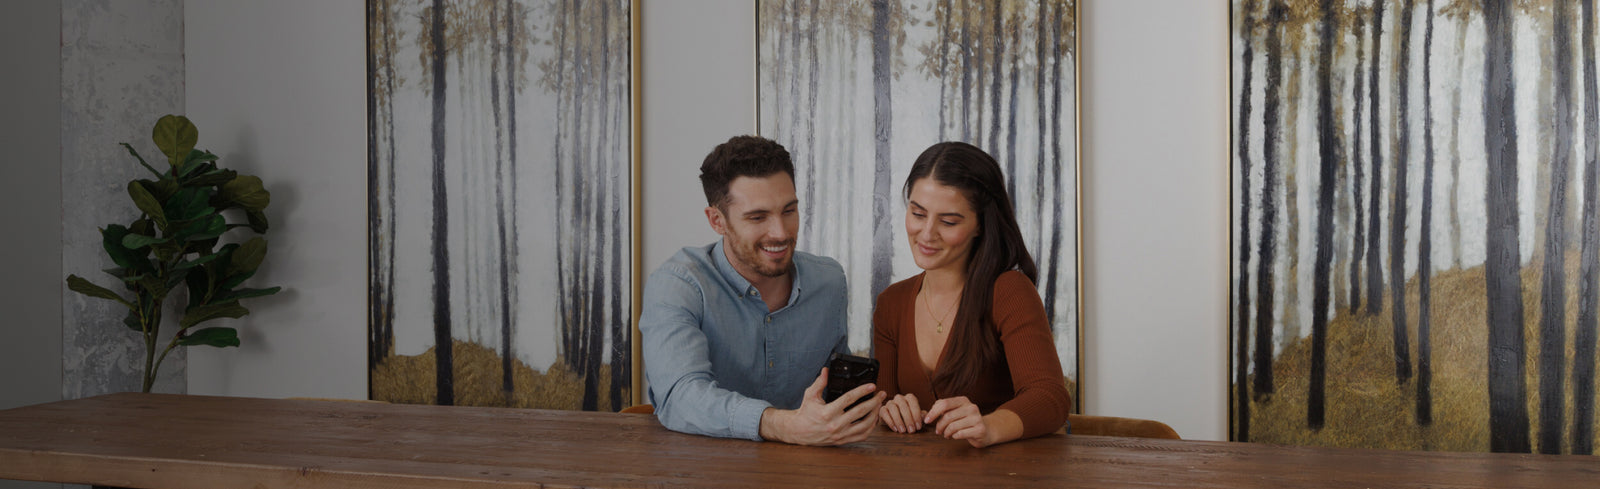 couple using a phone